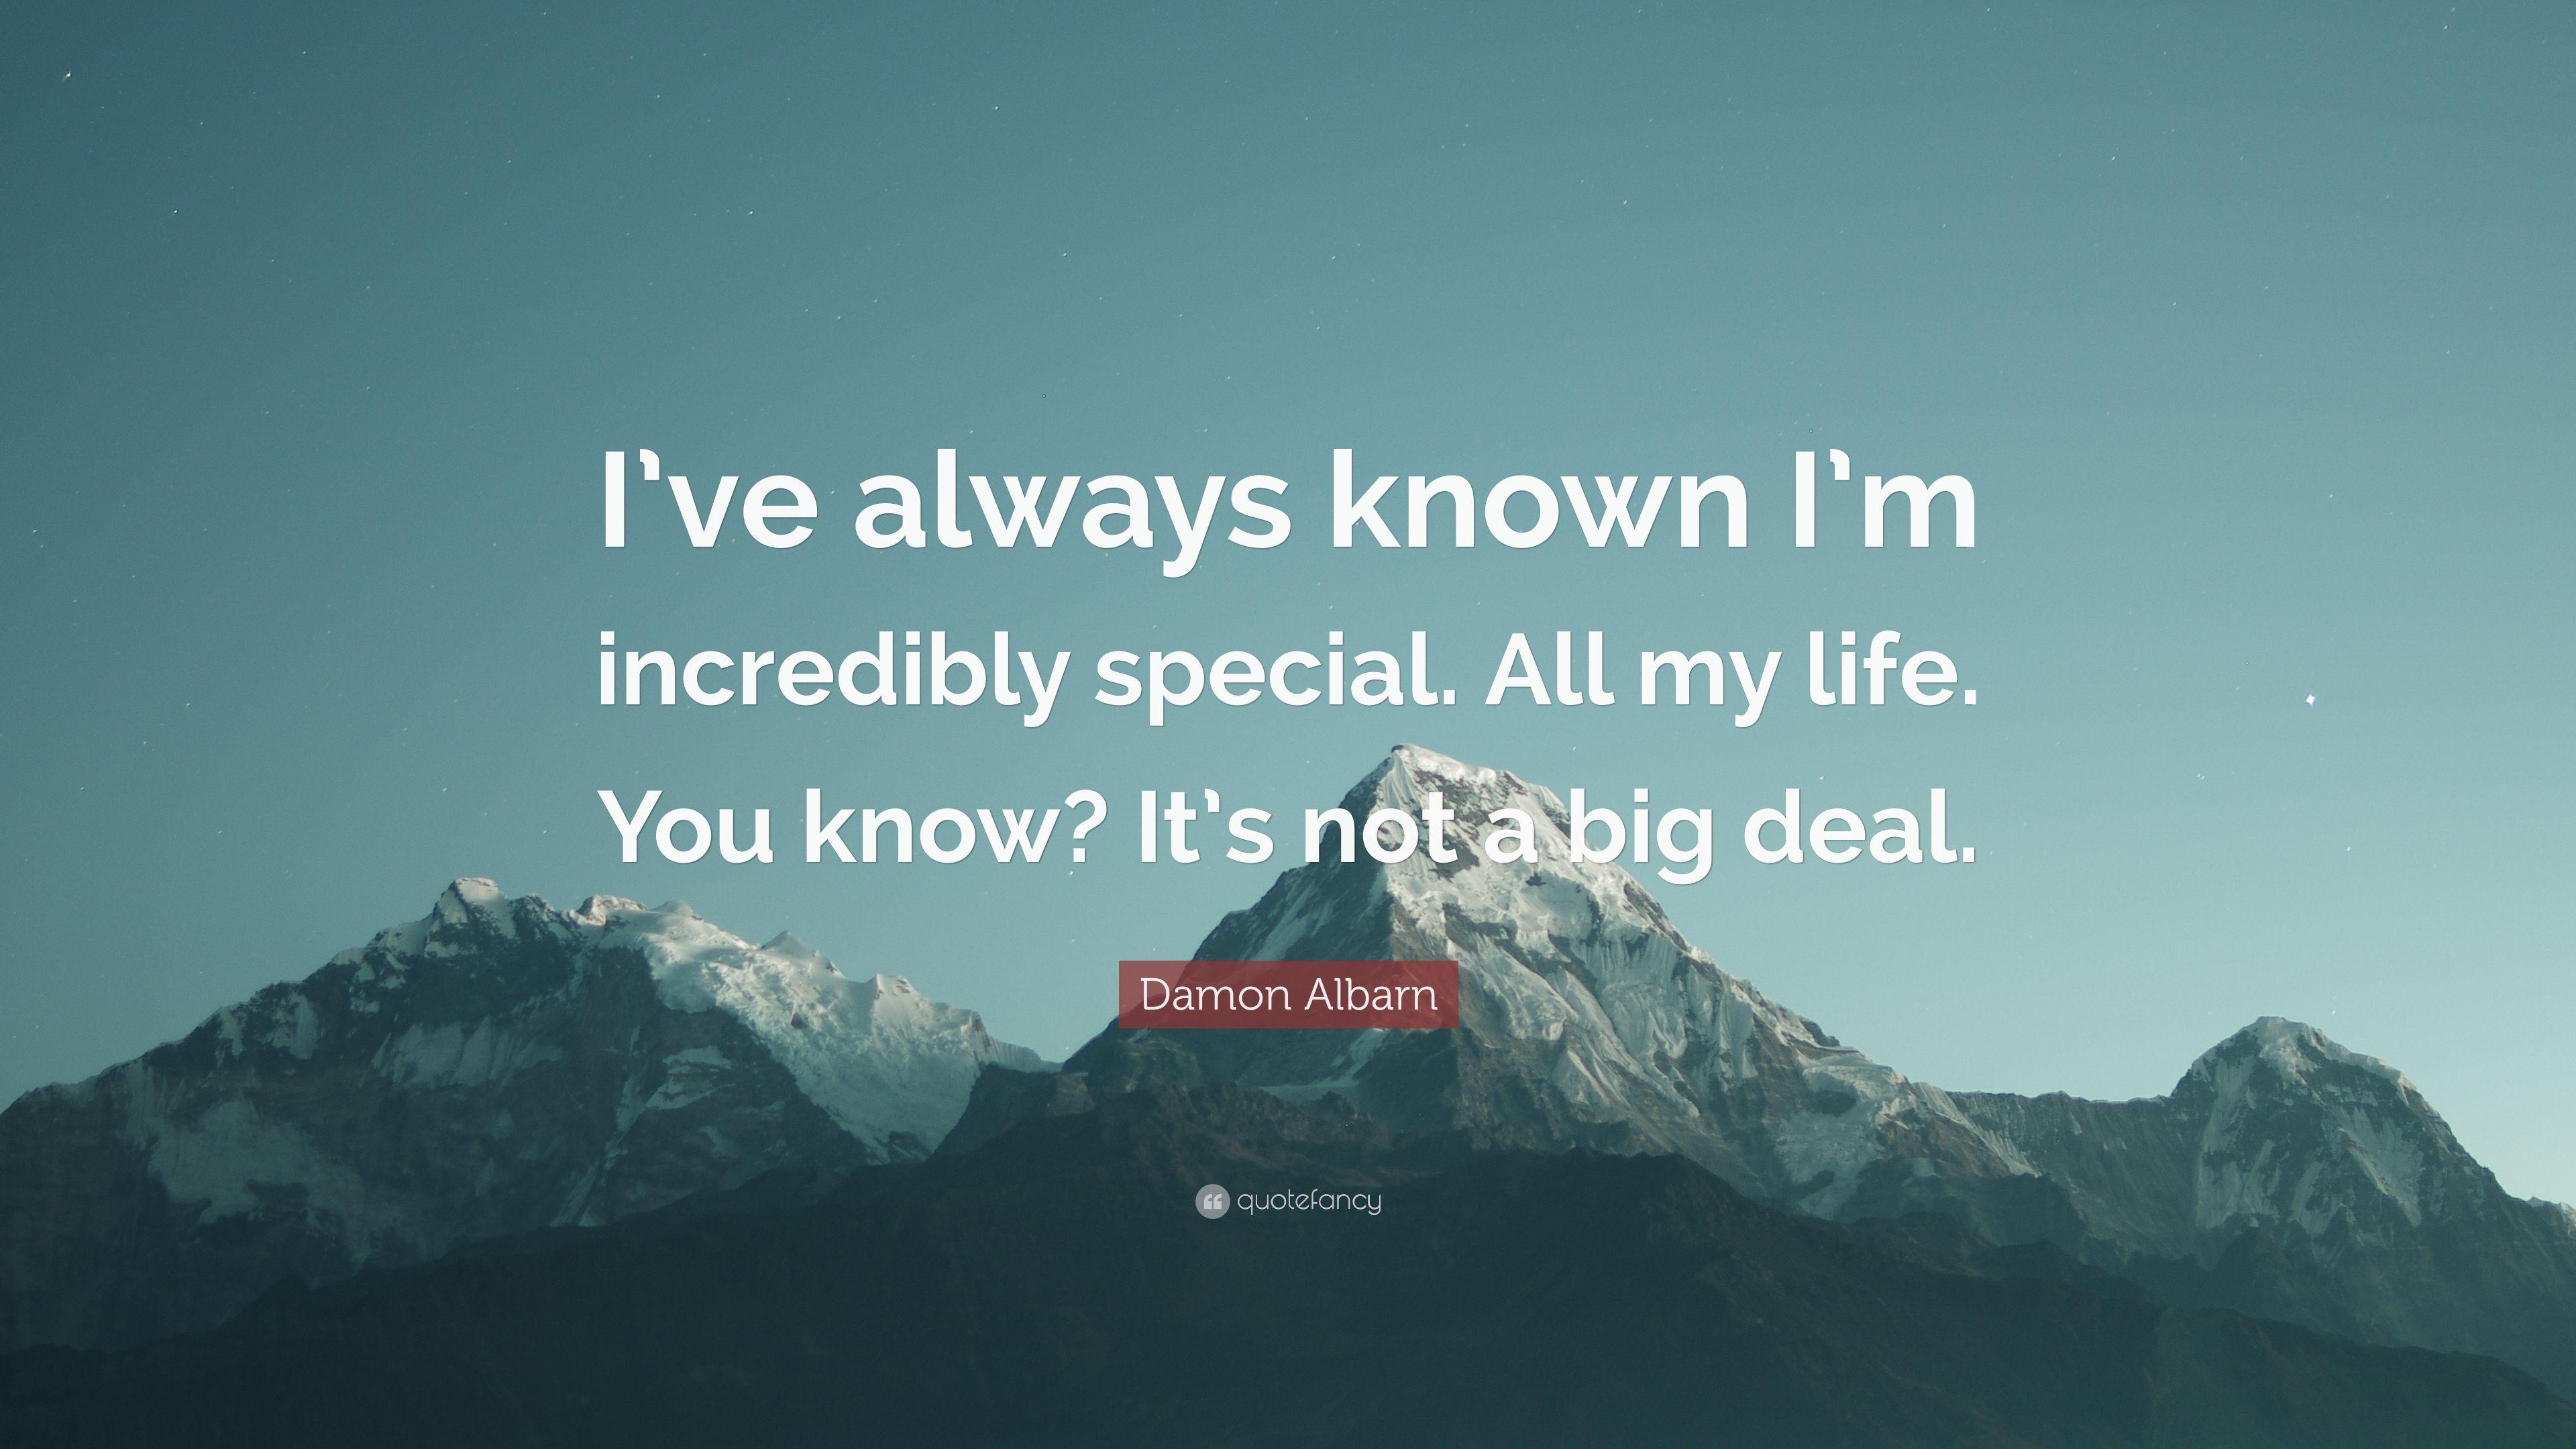 Damon Albarn Quote: “I've always known I'm incredibly special. All